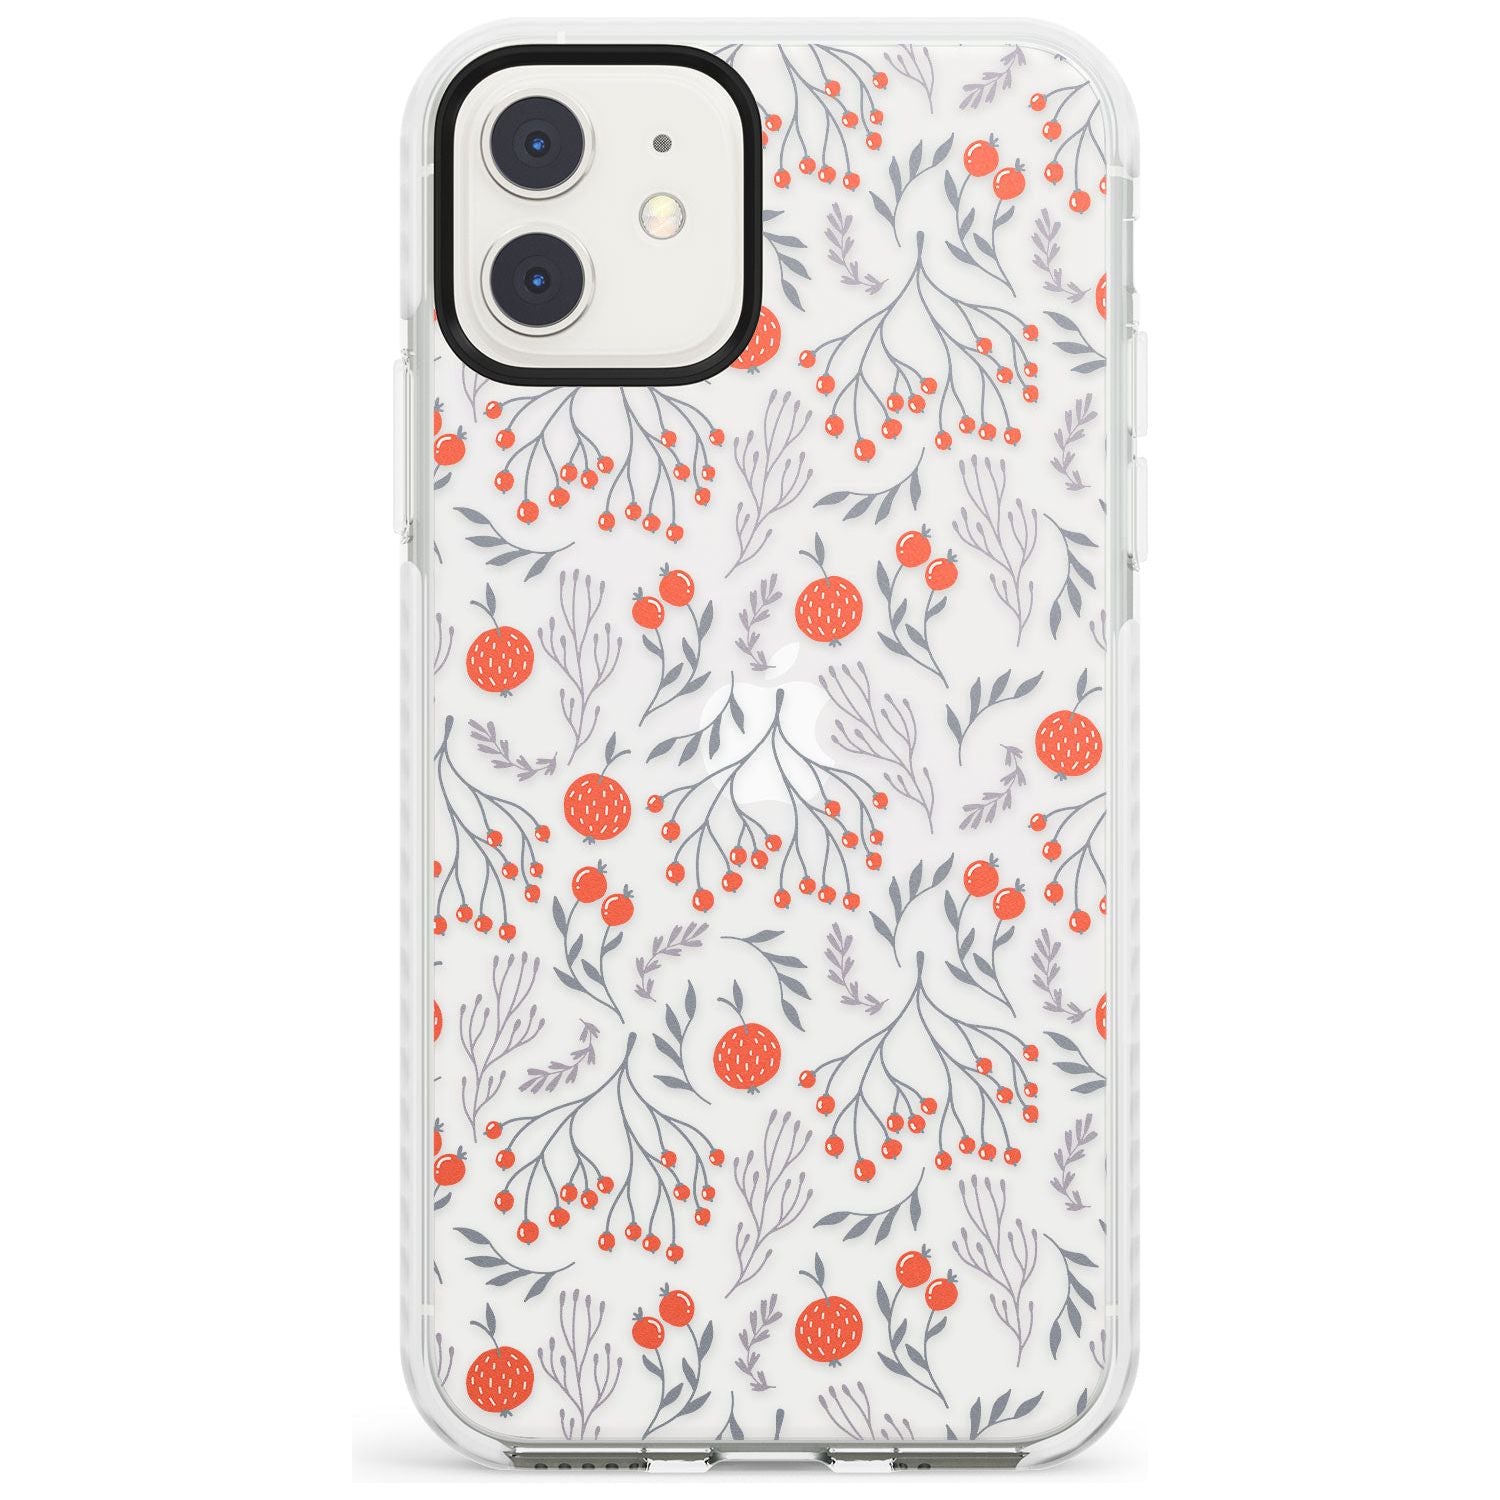 Red Fruits Transparent Floral Impact Phone Case for iPhone 11